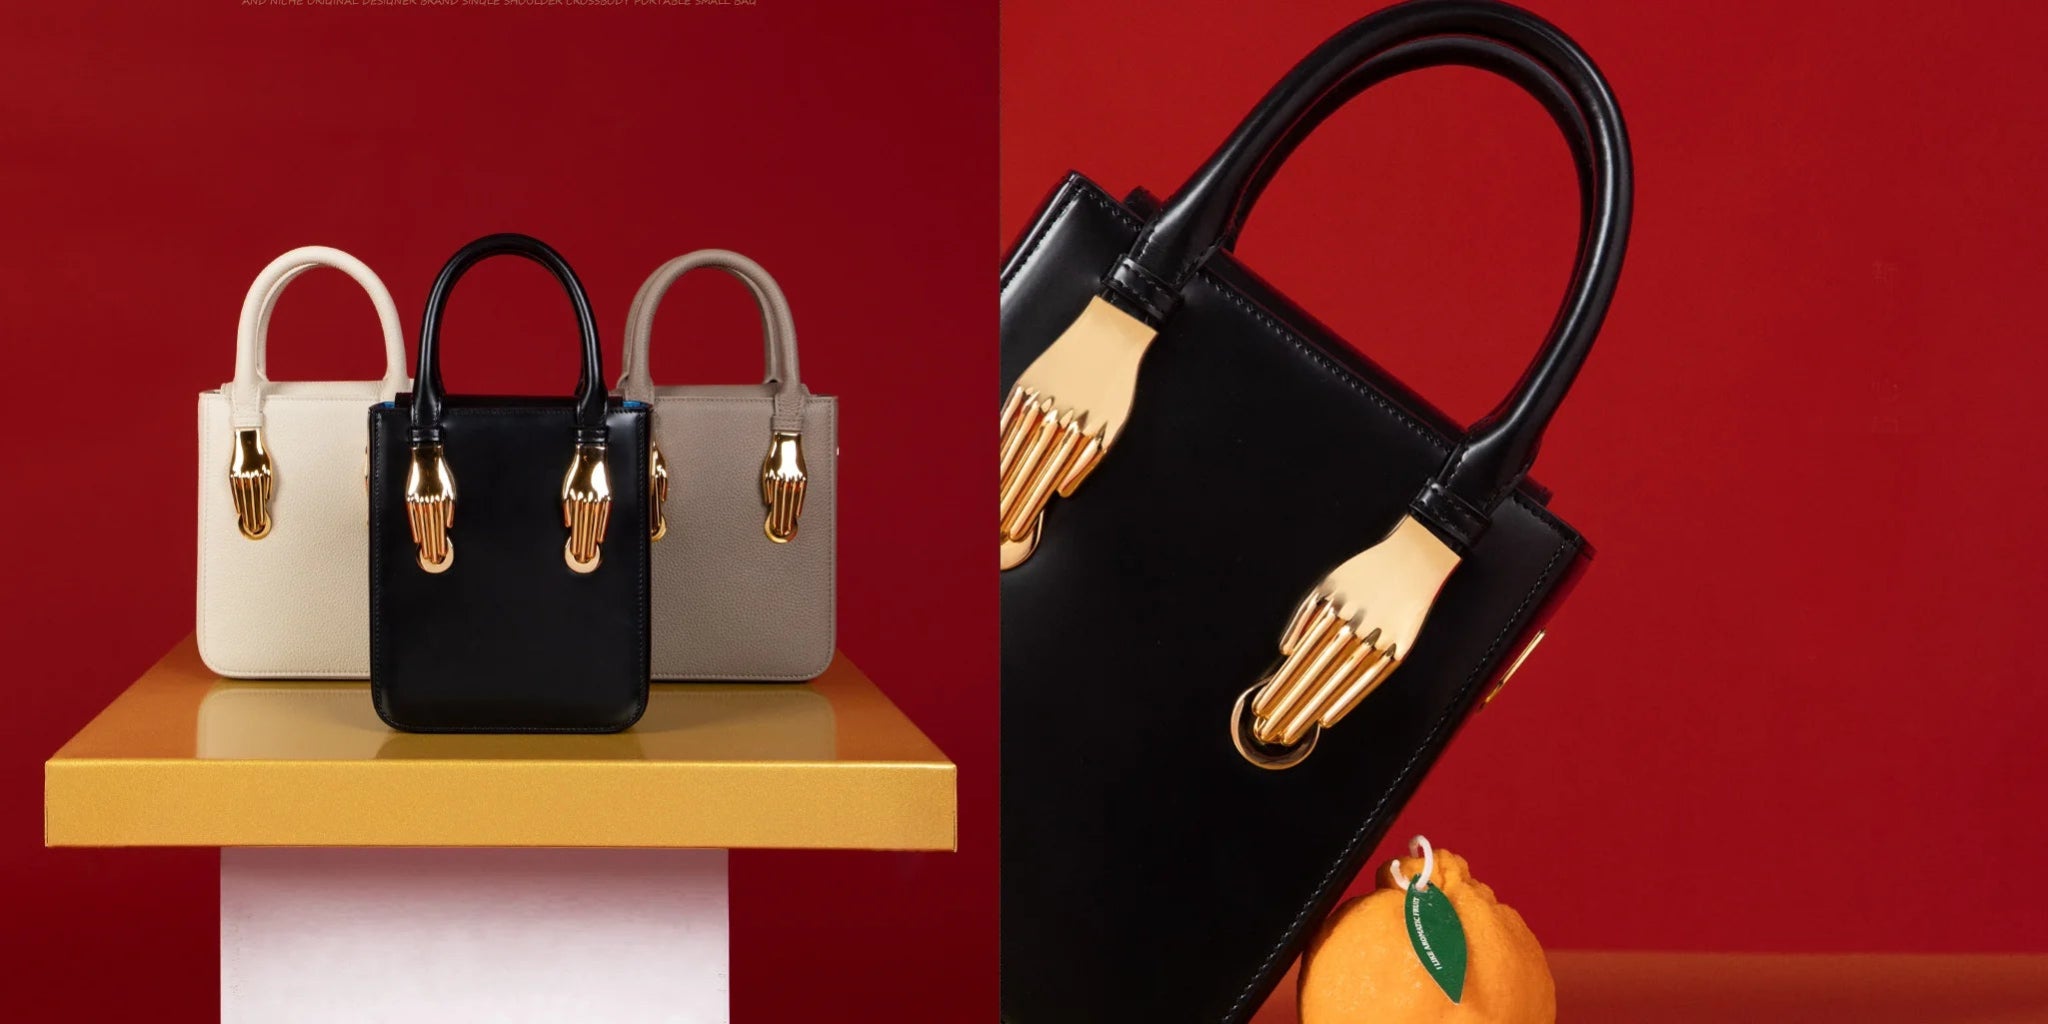 The Significance of Giving a Handbag as a Gift